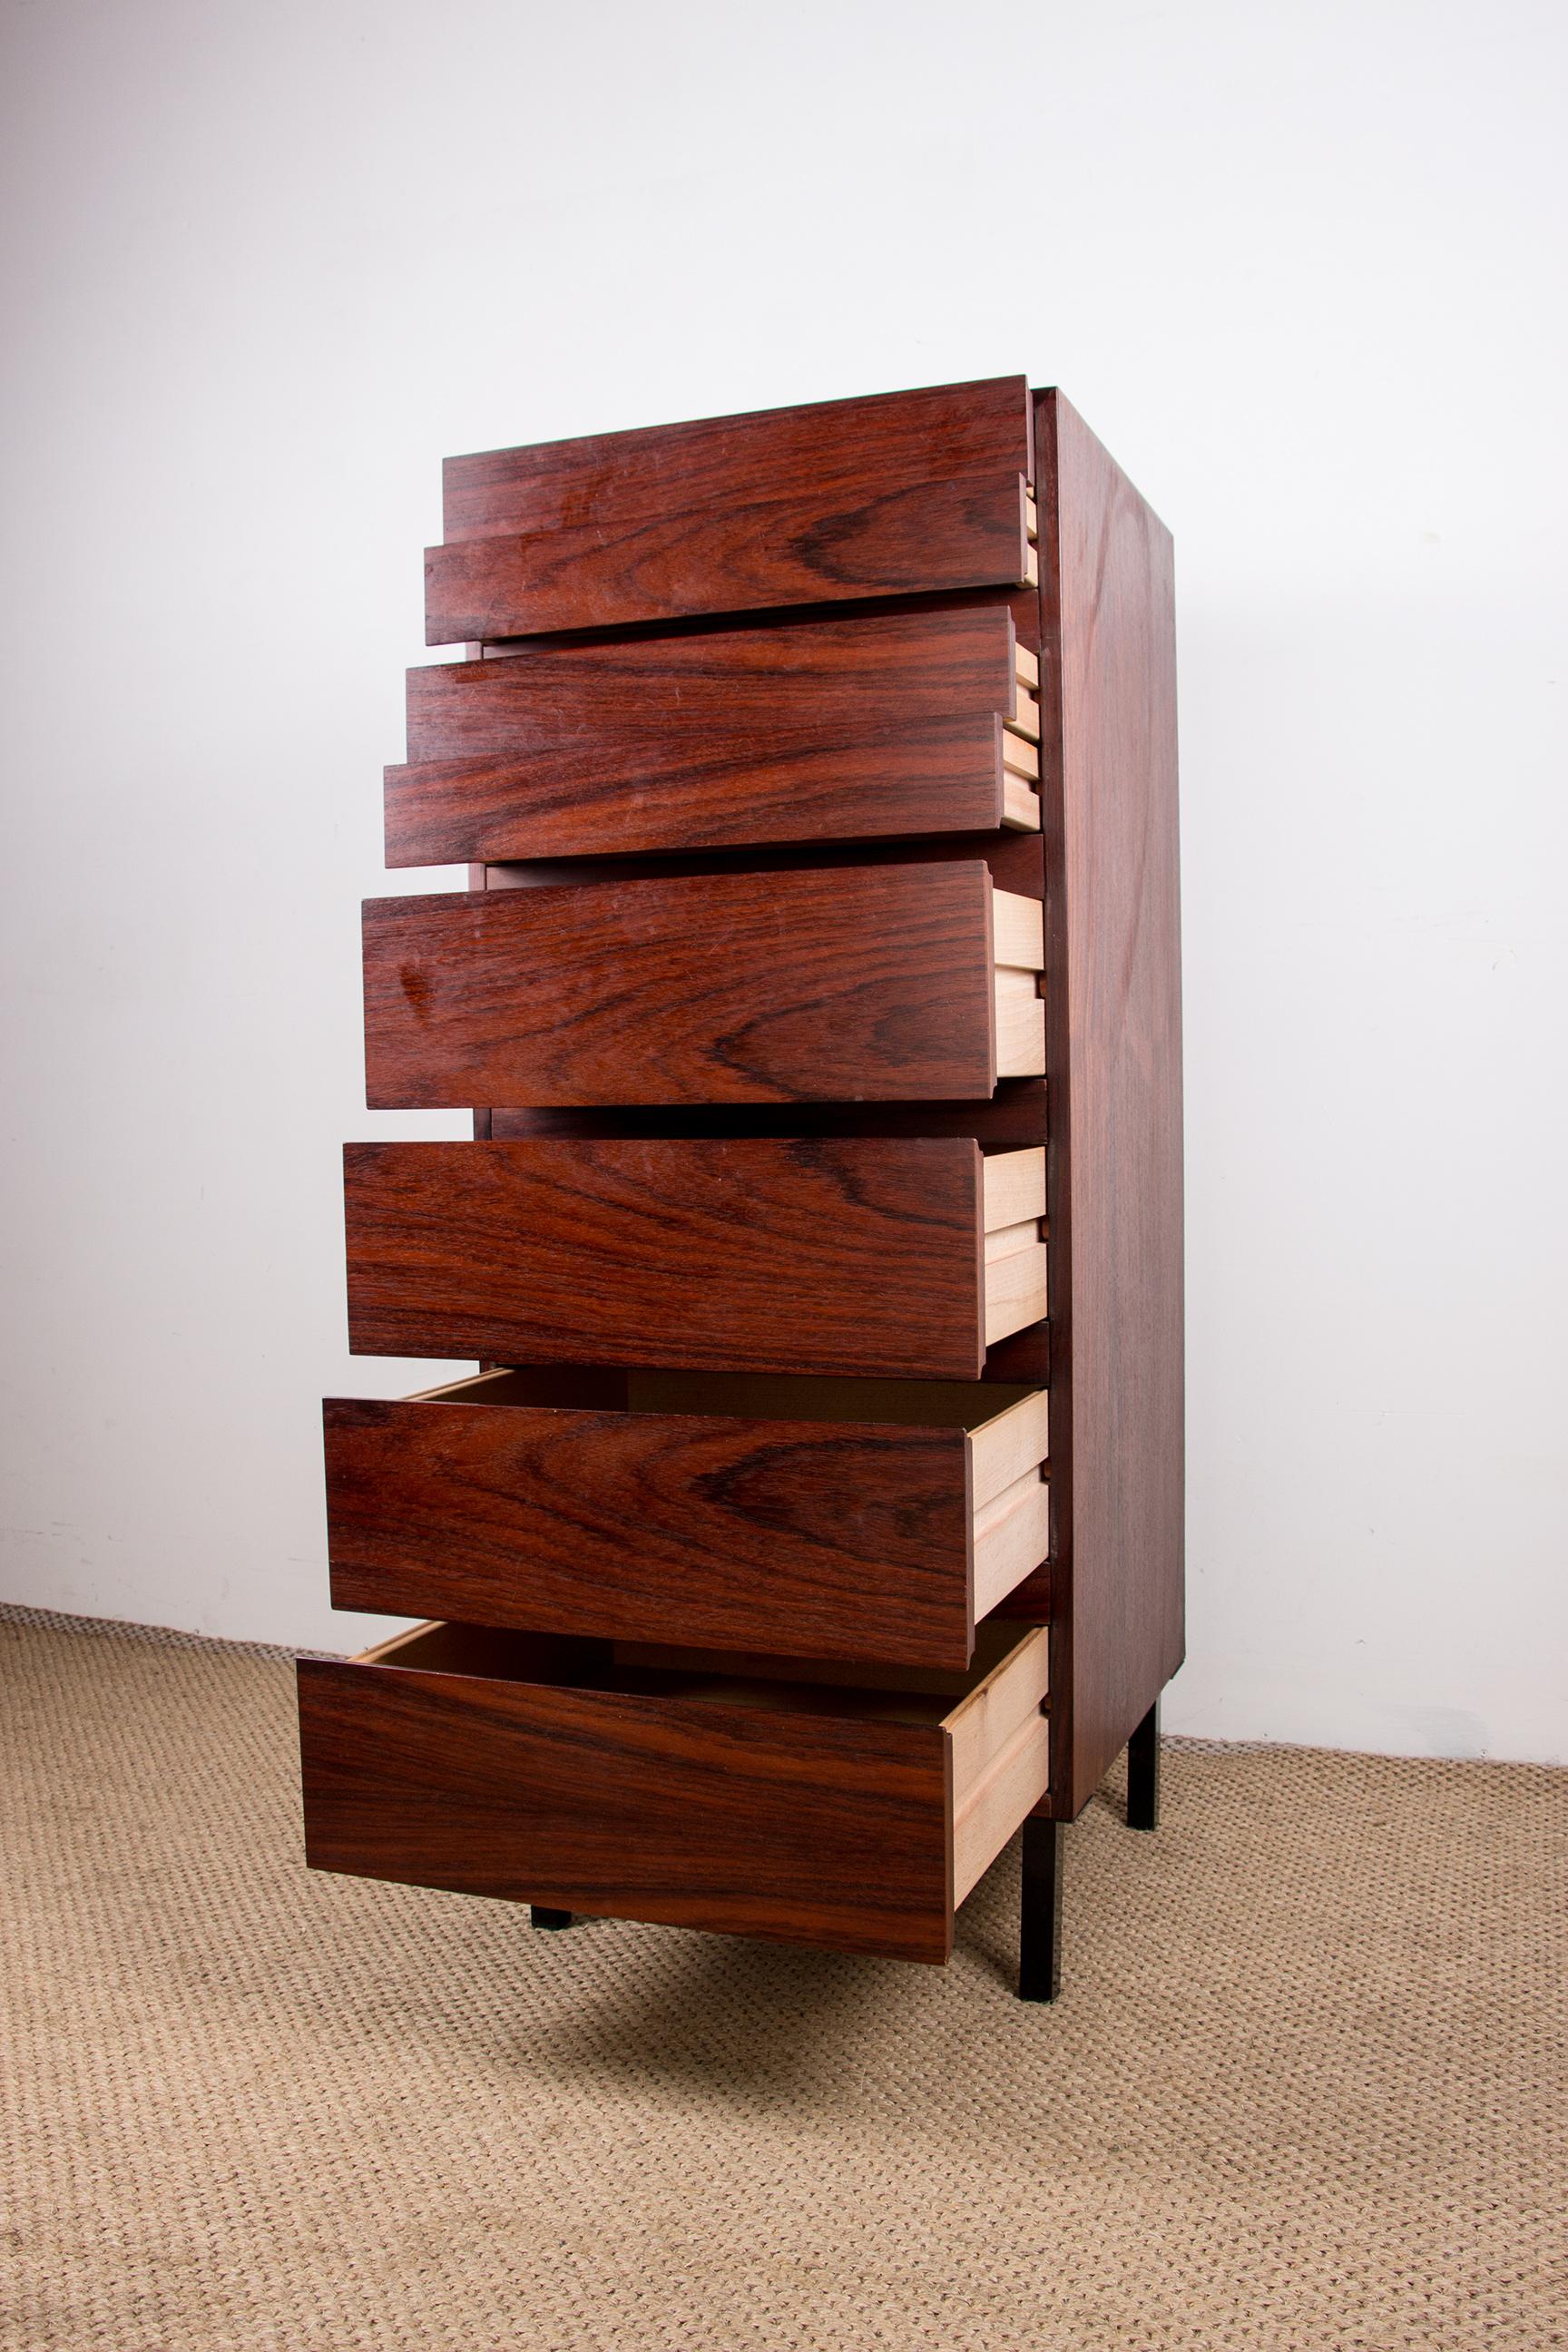 Mid-20th Century Danish Rosewood Chest of Drawers, Chiffonier Model 126 by Arne Wahl Iversen 1960